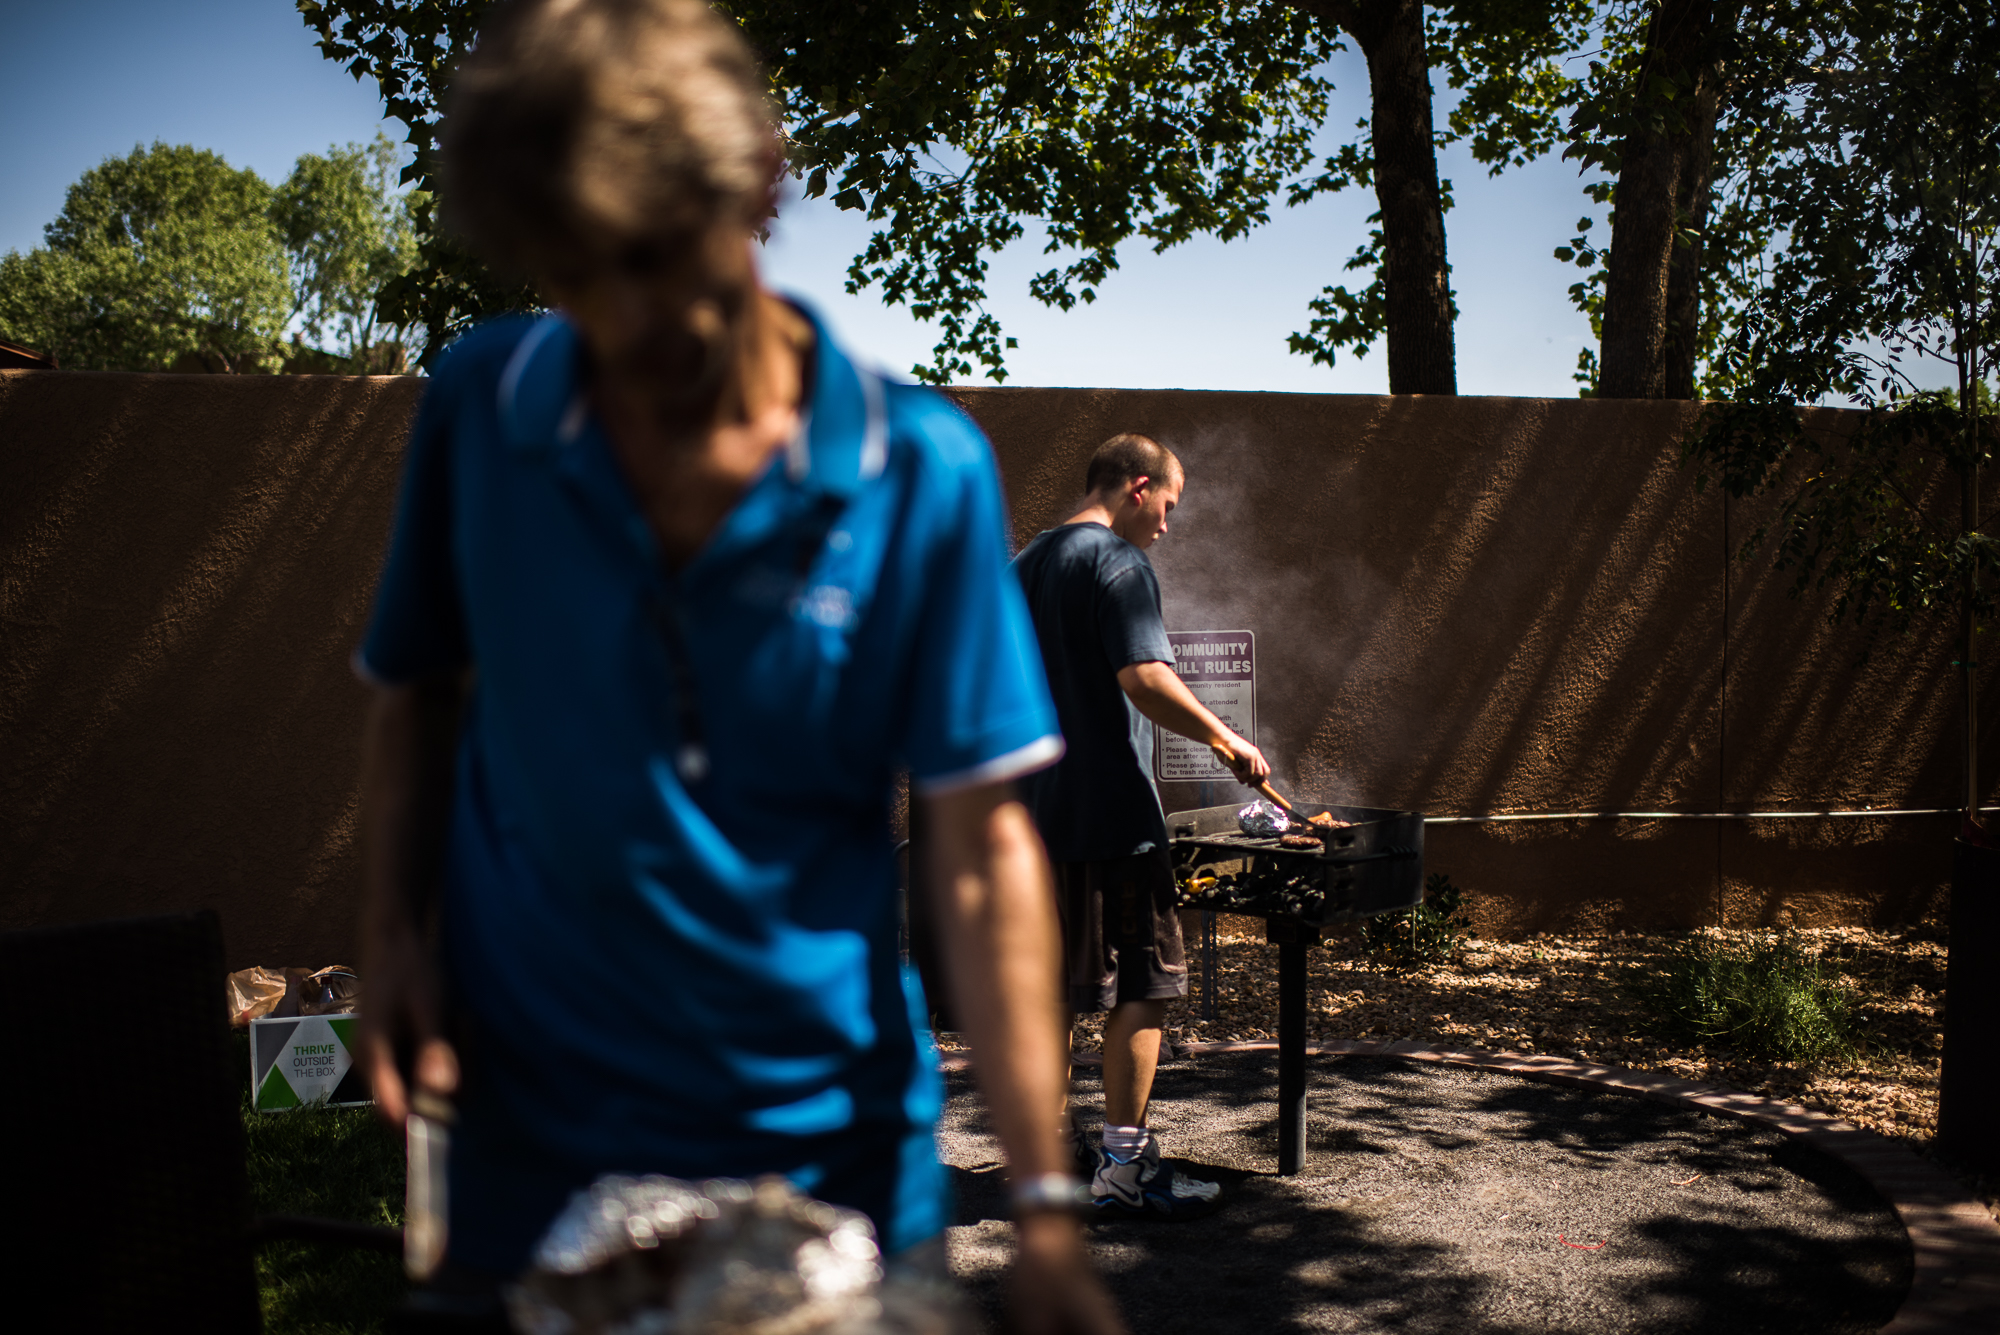  Vinny, age 18, grills meat while a family friend, Jerry, prepares the lunch table in the recreation area of the apartment complex where Jerry lives, 2017. 